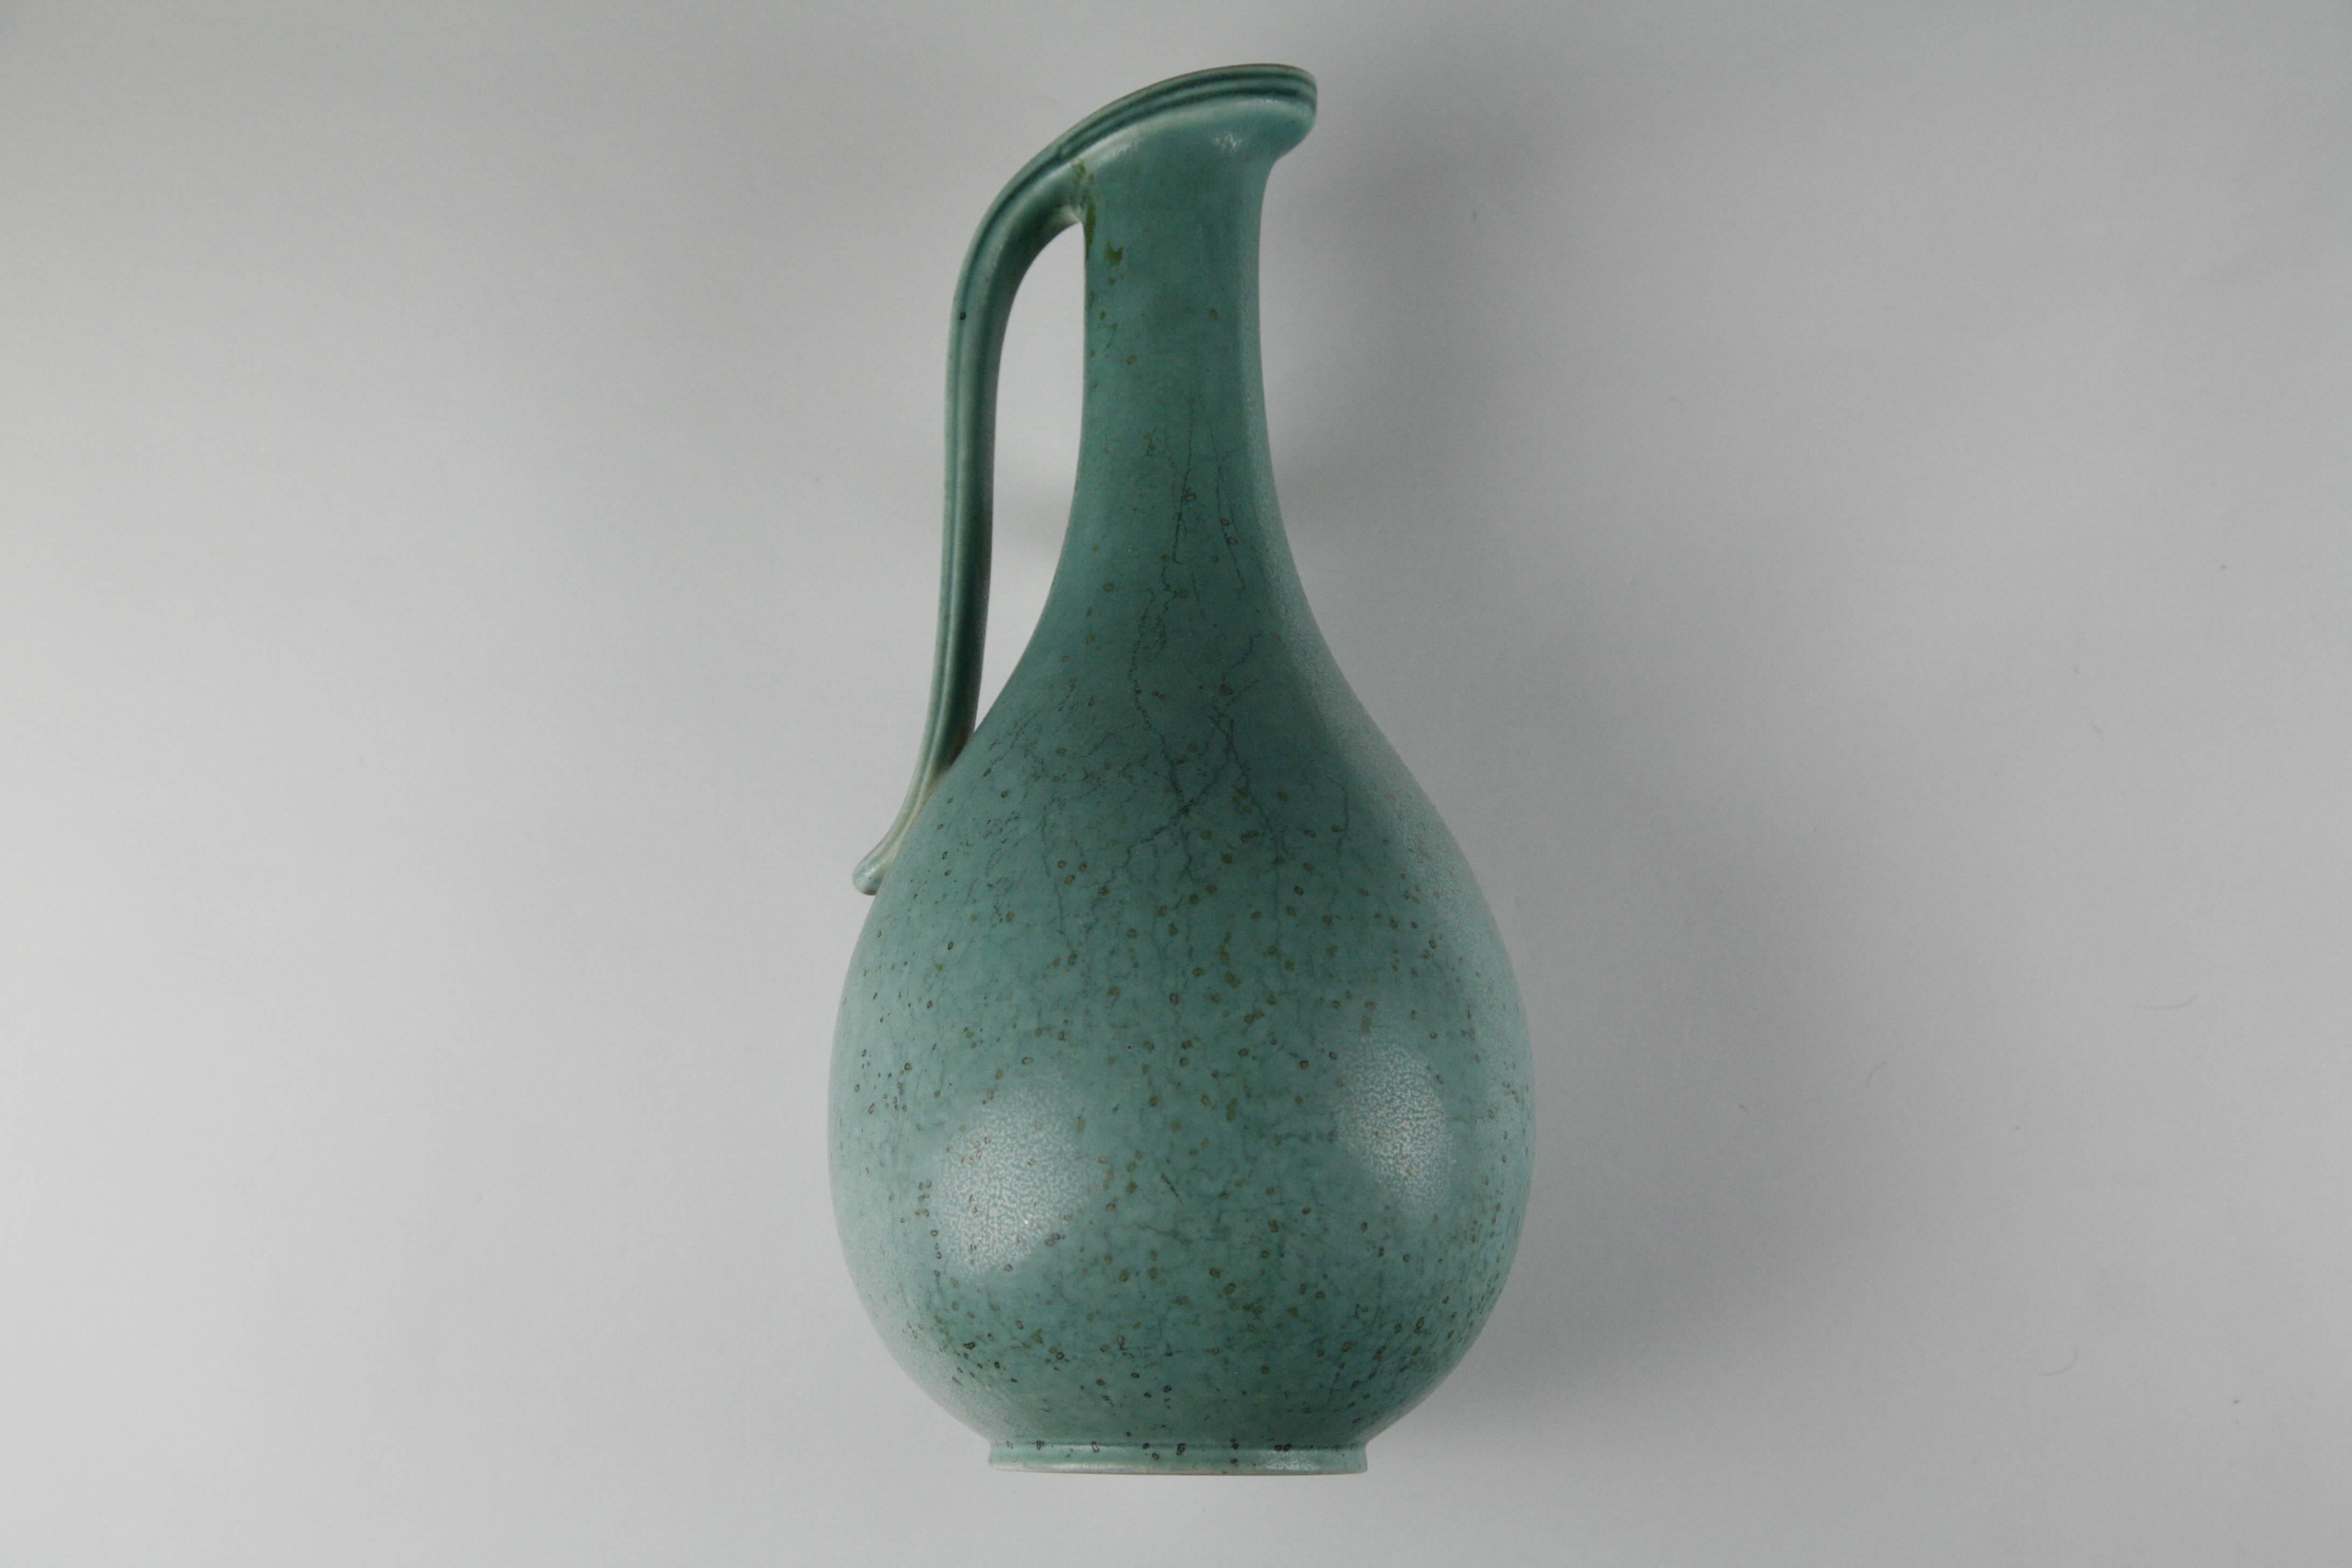 Sweden, 1950s ceramic vase by Gunnar Nylund, for Rörstrand in quartz green excellent condition and signed on the bottom.